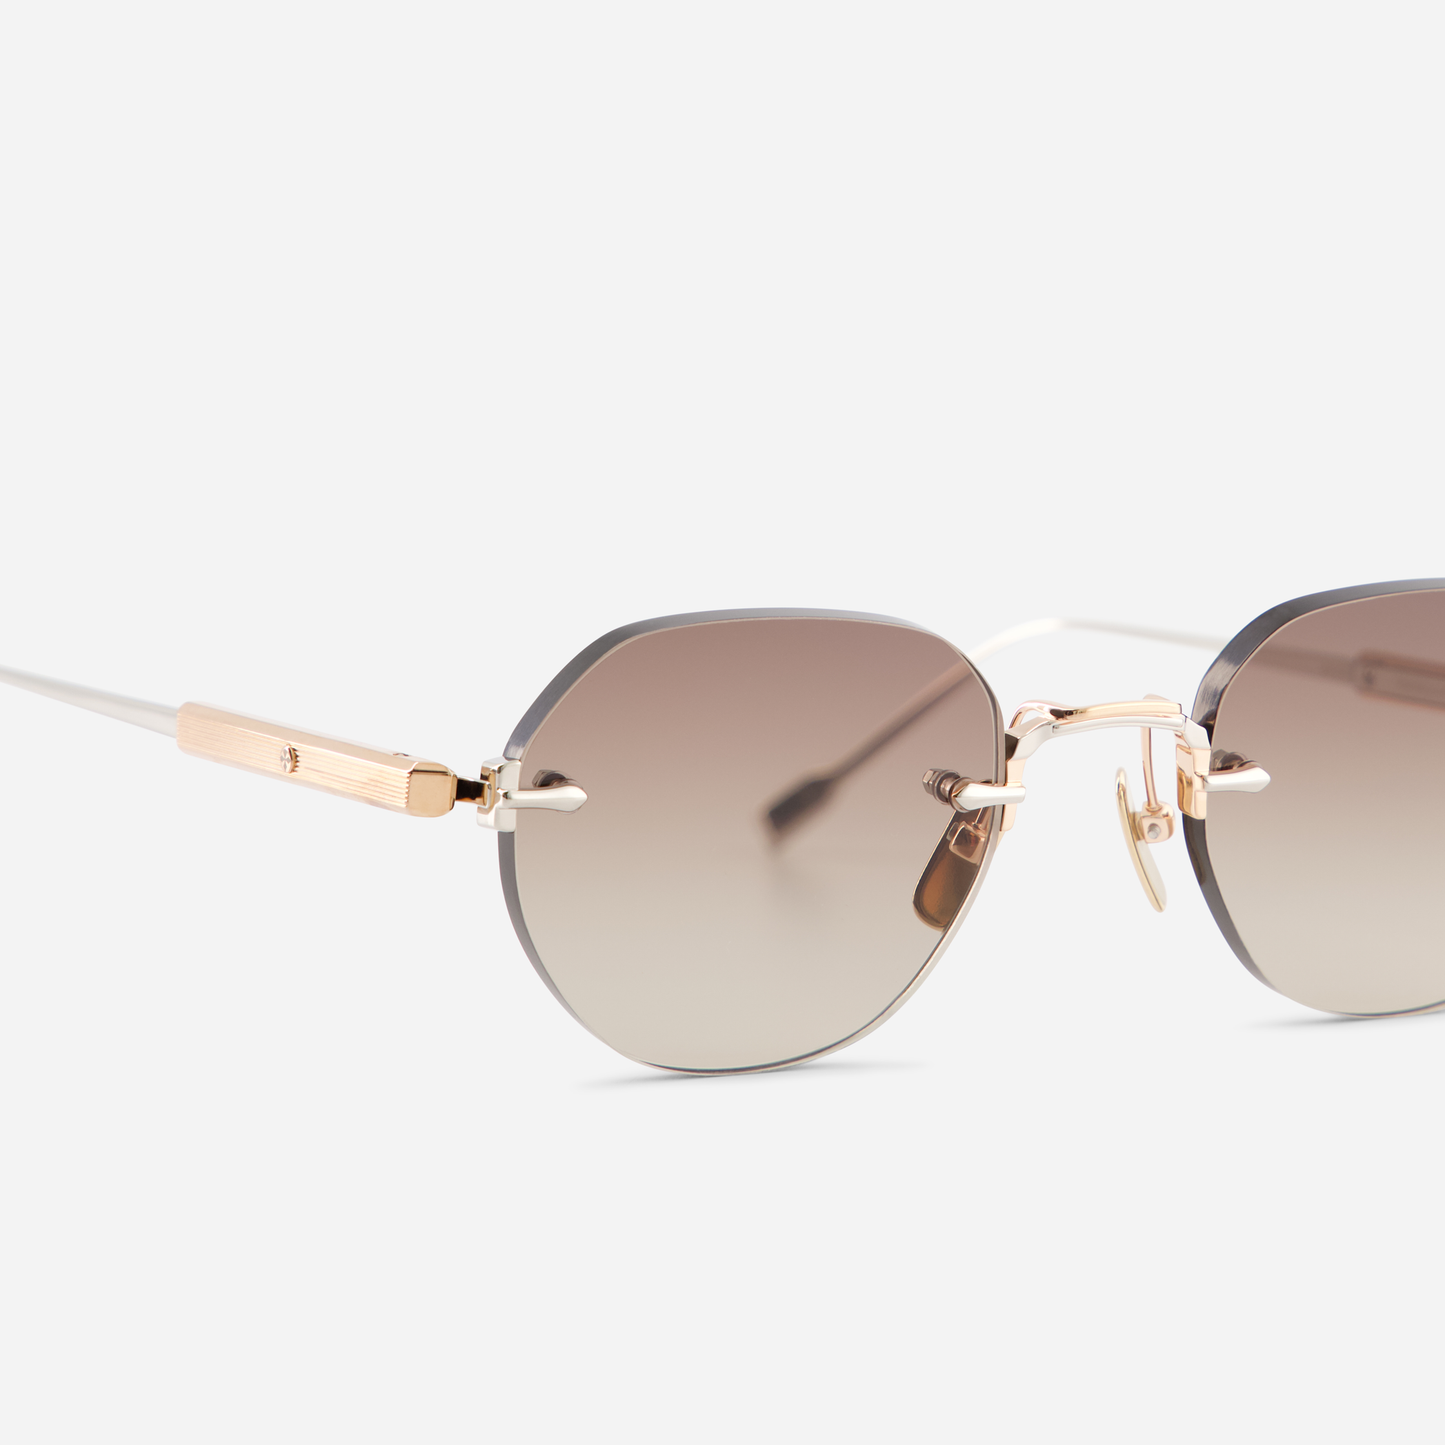 Terebellum I S604, where rose gold and platinum meet enchanting gradient brown-tinted lenses. Round shape